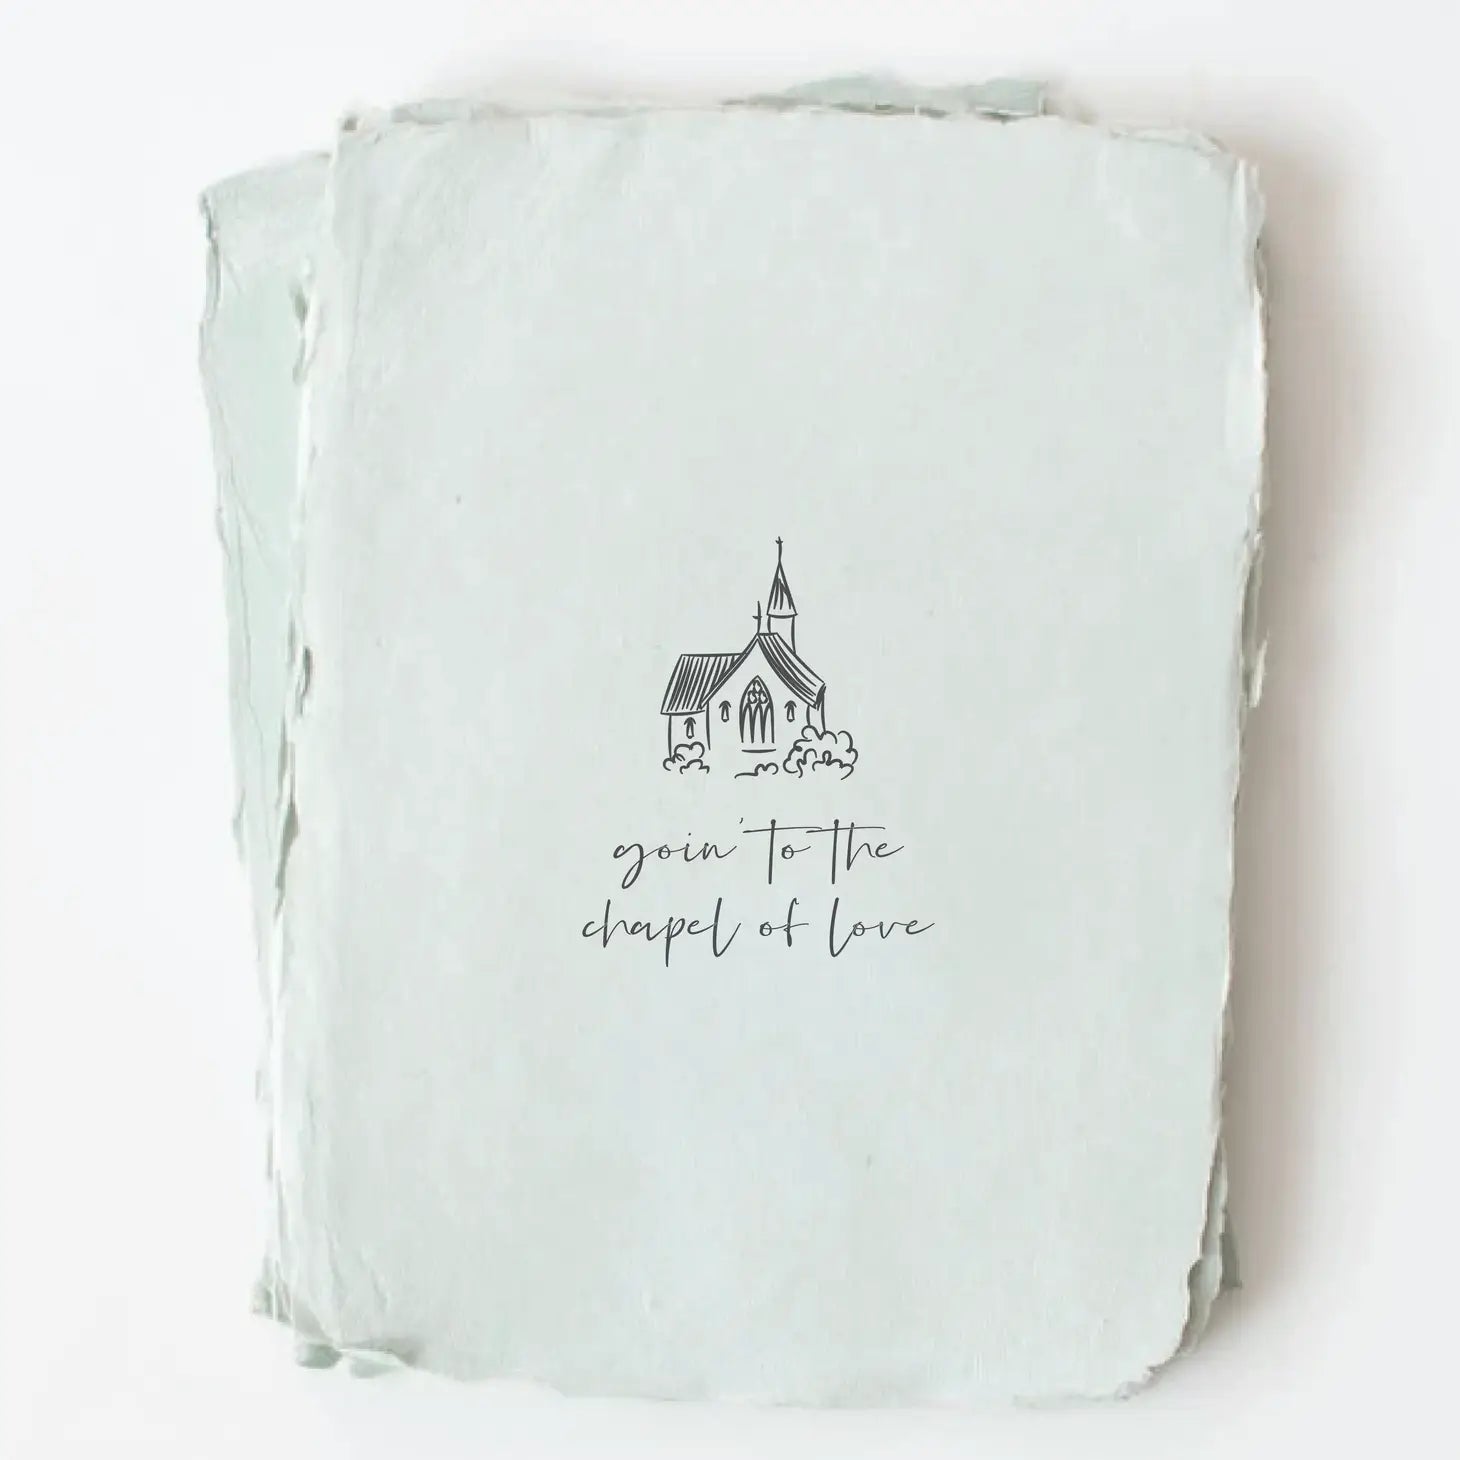 "Going to the Chapel of Love" Wedding Greeting Card